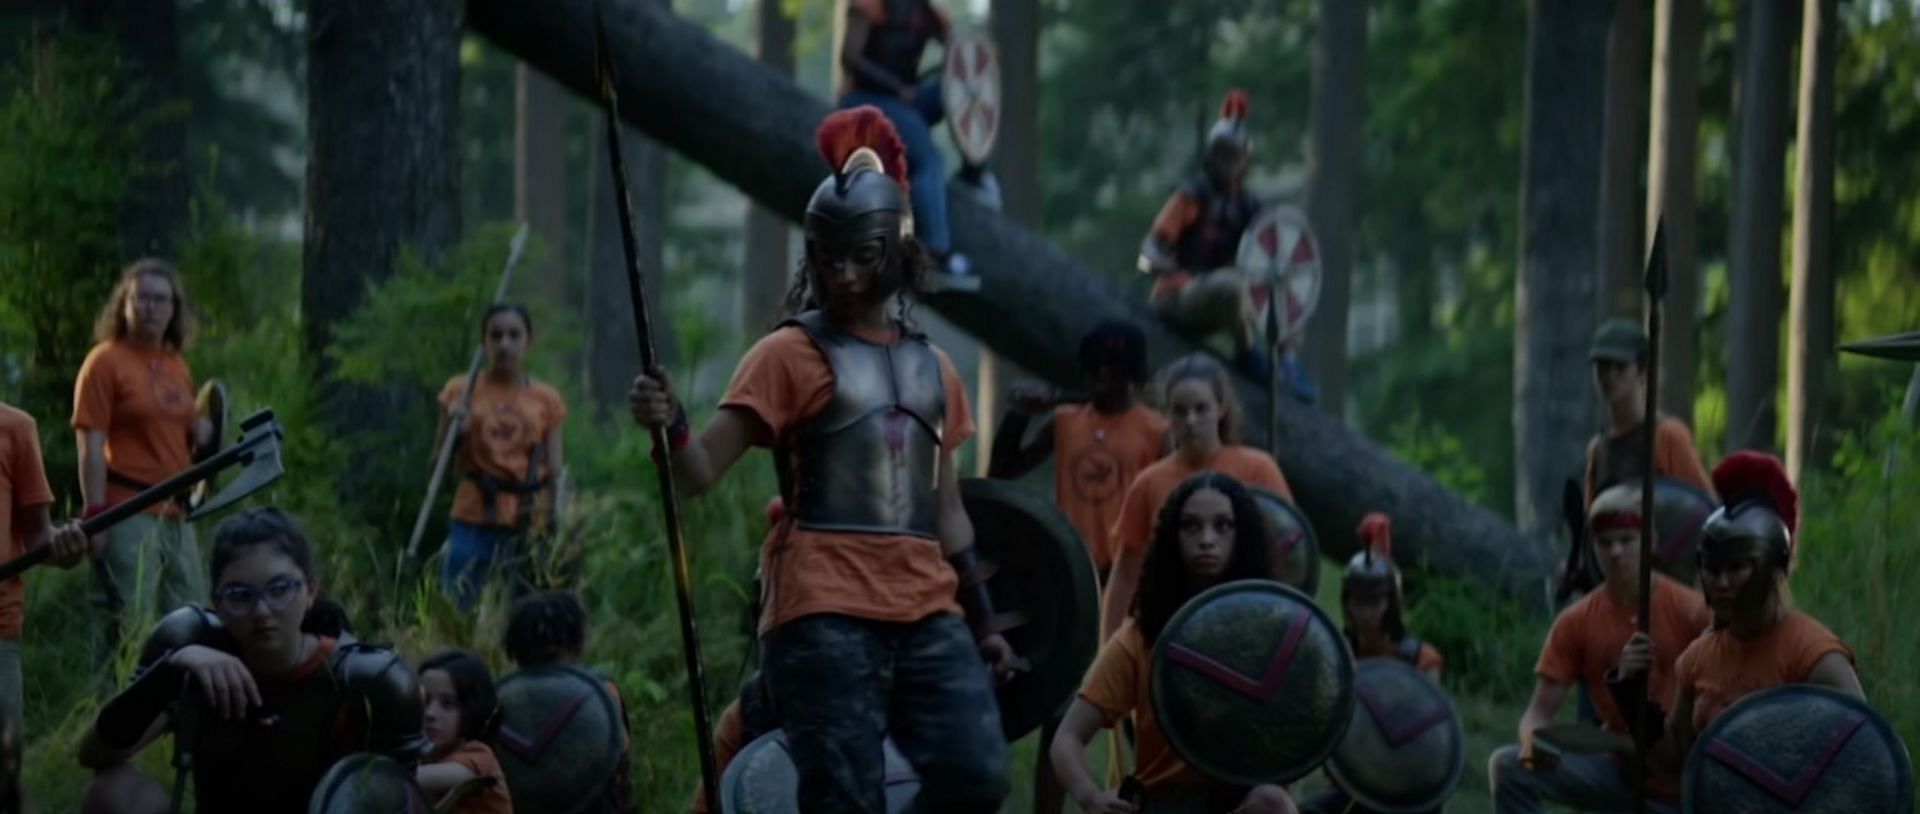 A still from Percy Jackson and the Olympians teaser (Image via Disney Plus/YouTube)